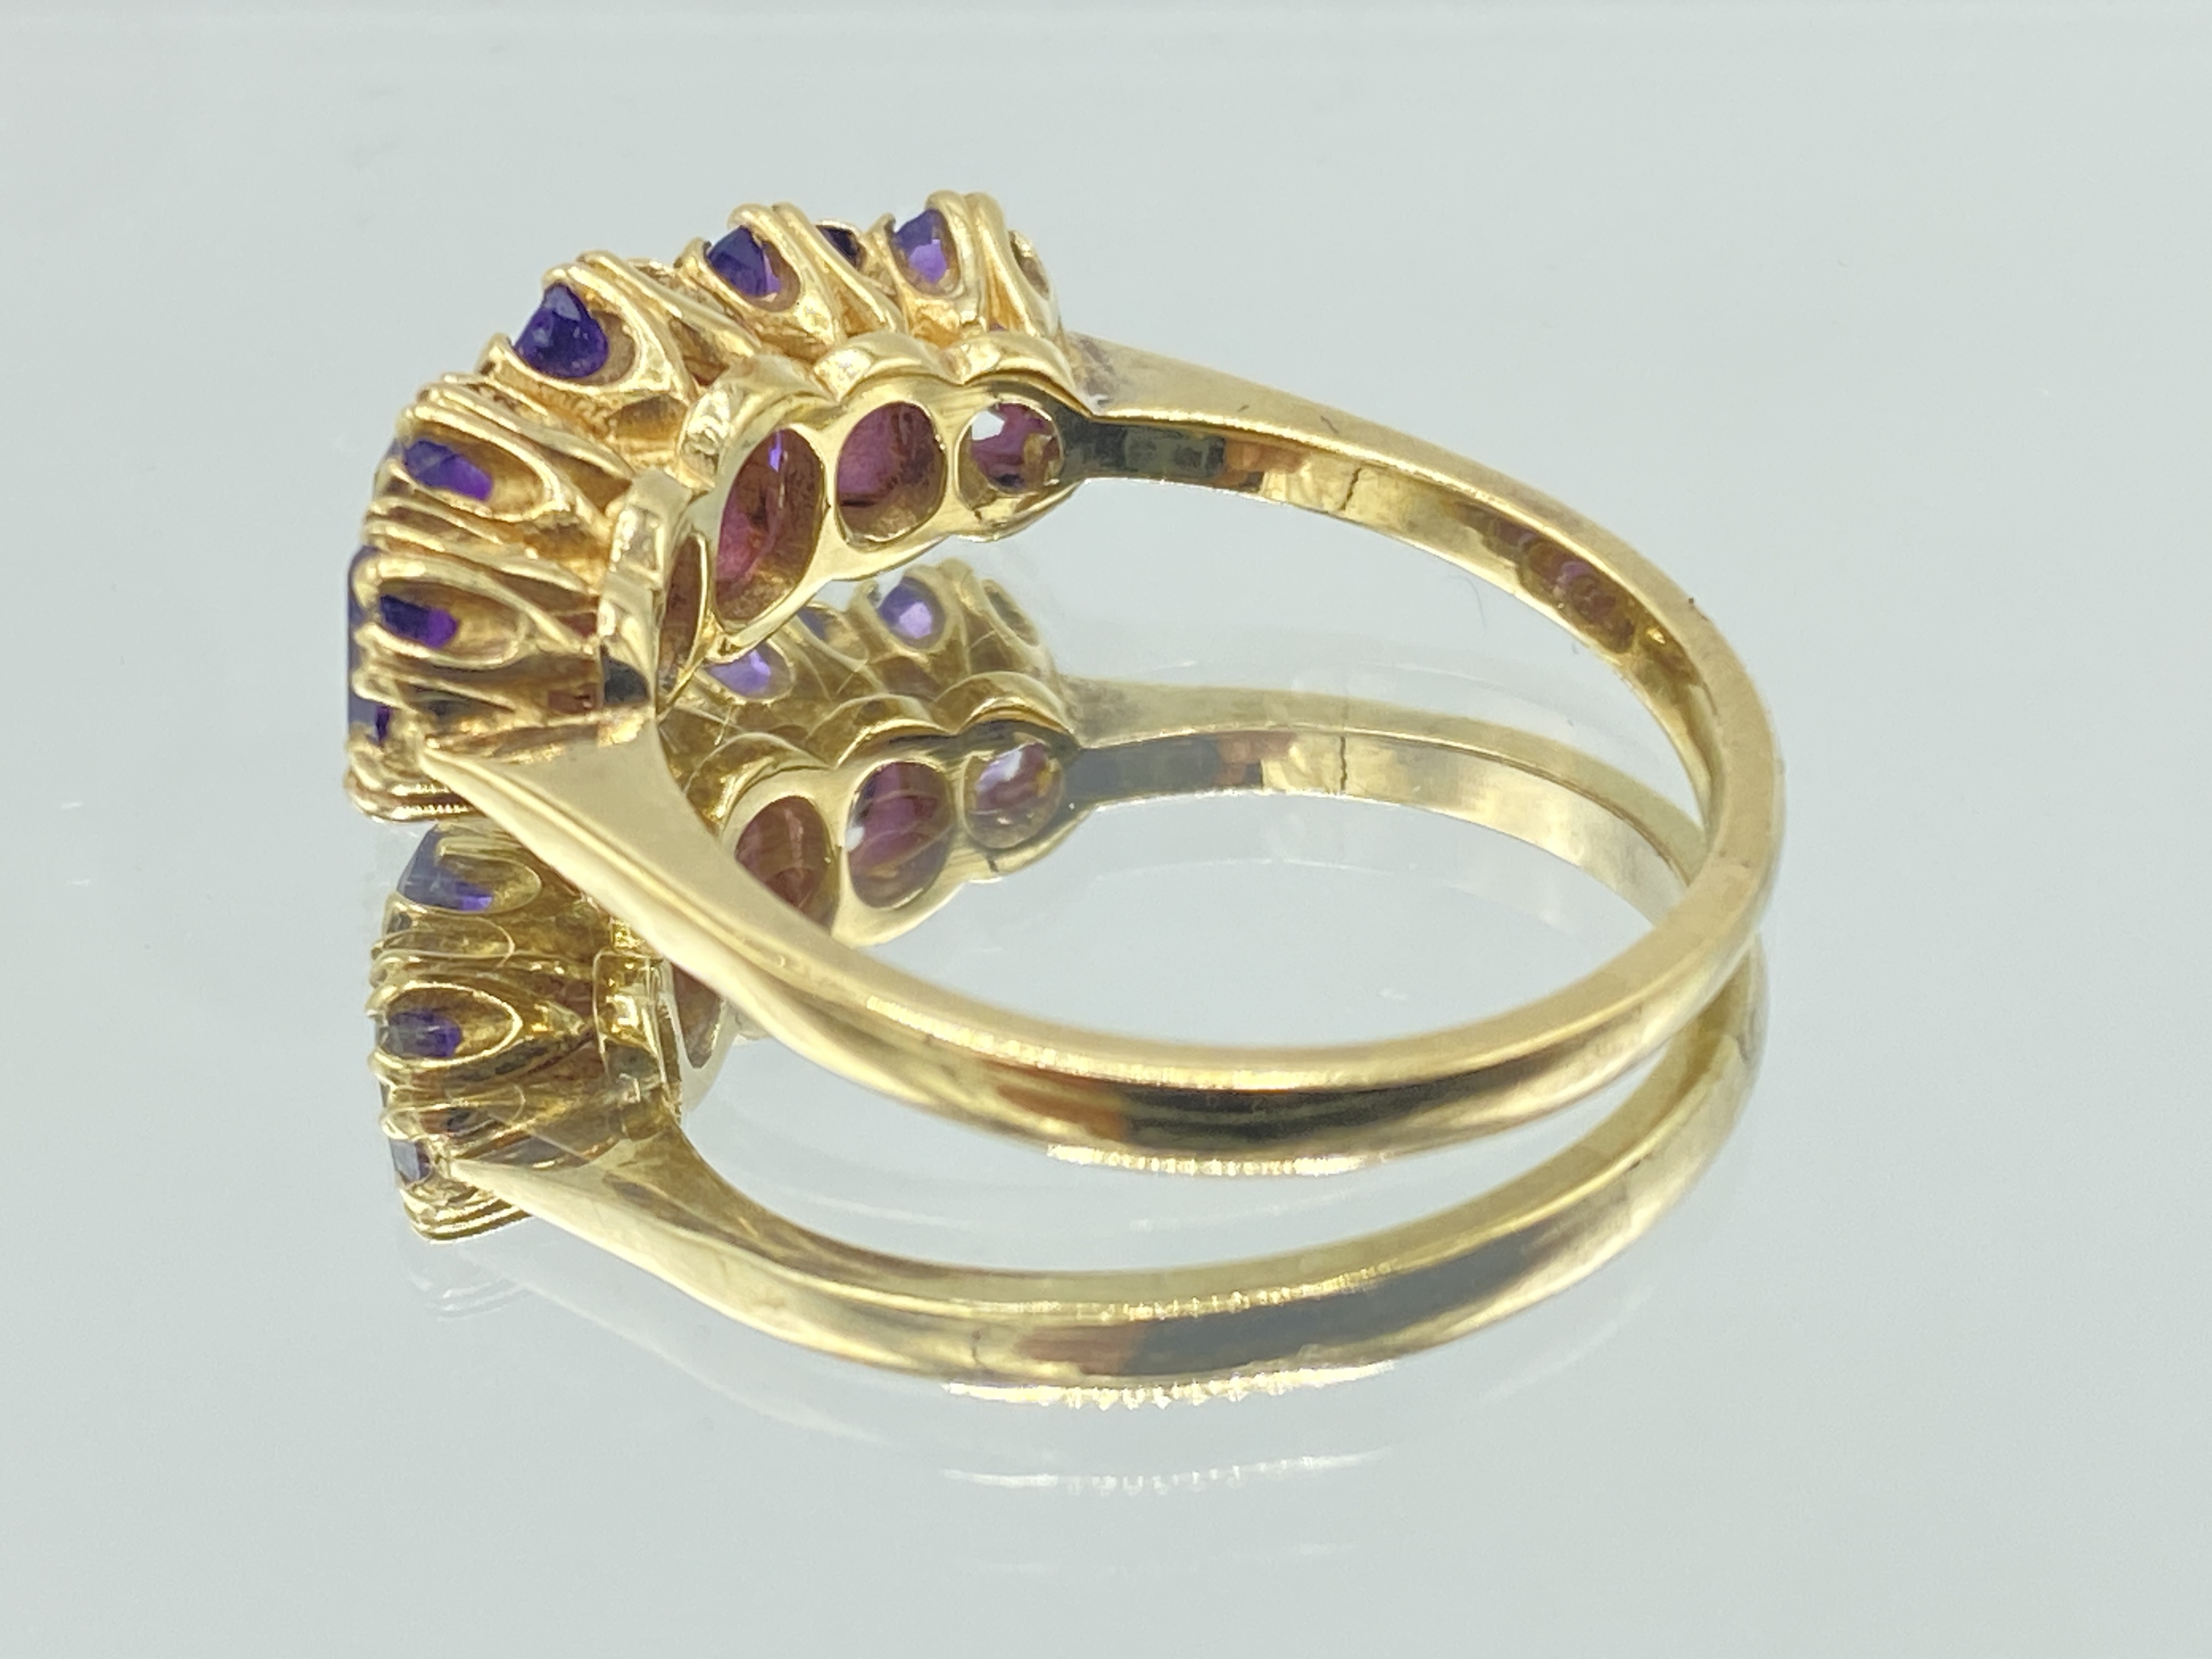 Two 9ct gold and 5 stone rings - Image 6 of 7